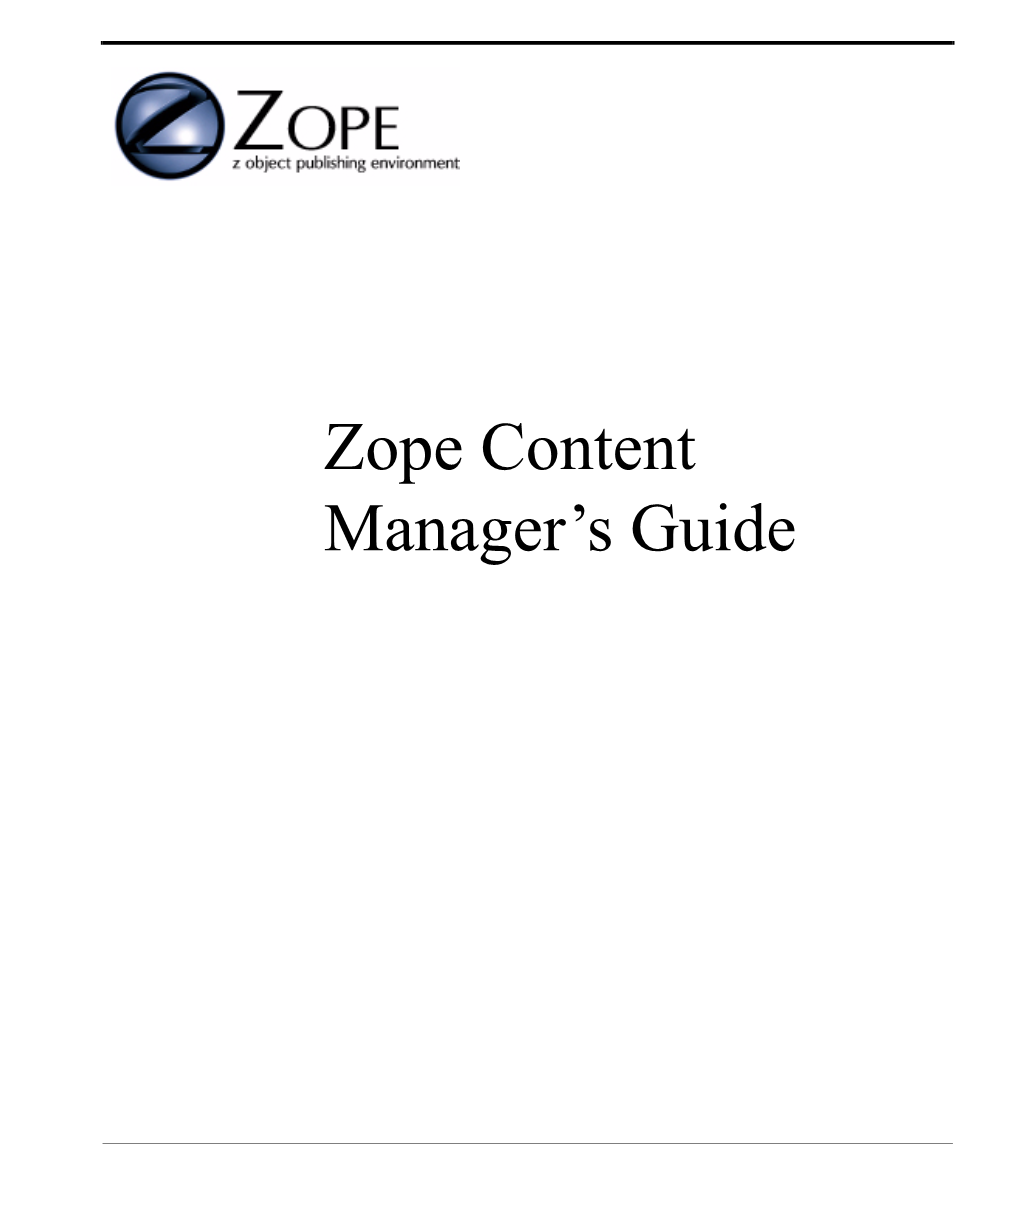 Zope Content Manager's Guide